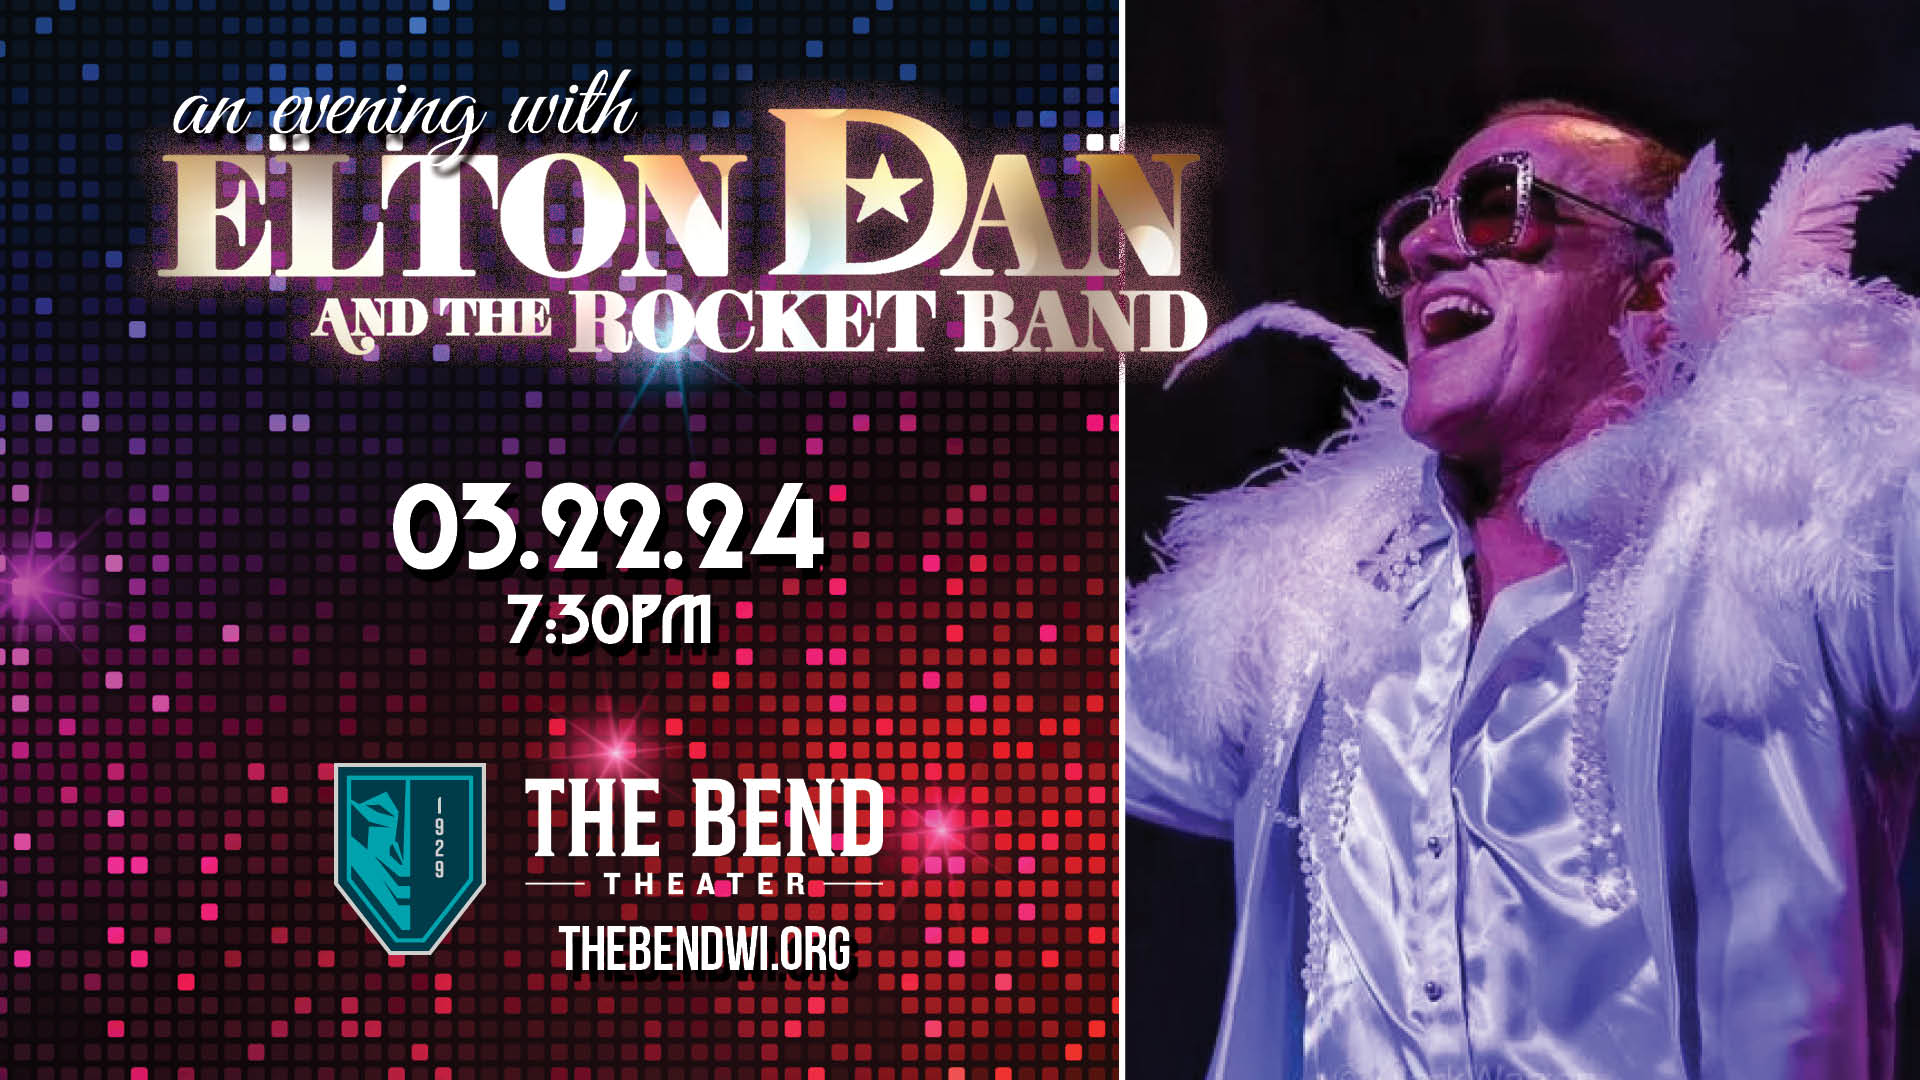 An Evening with Elton Dan & The Rocket Band Live at The Bend Theater